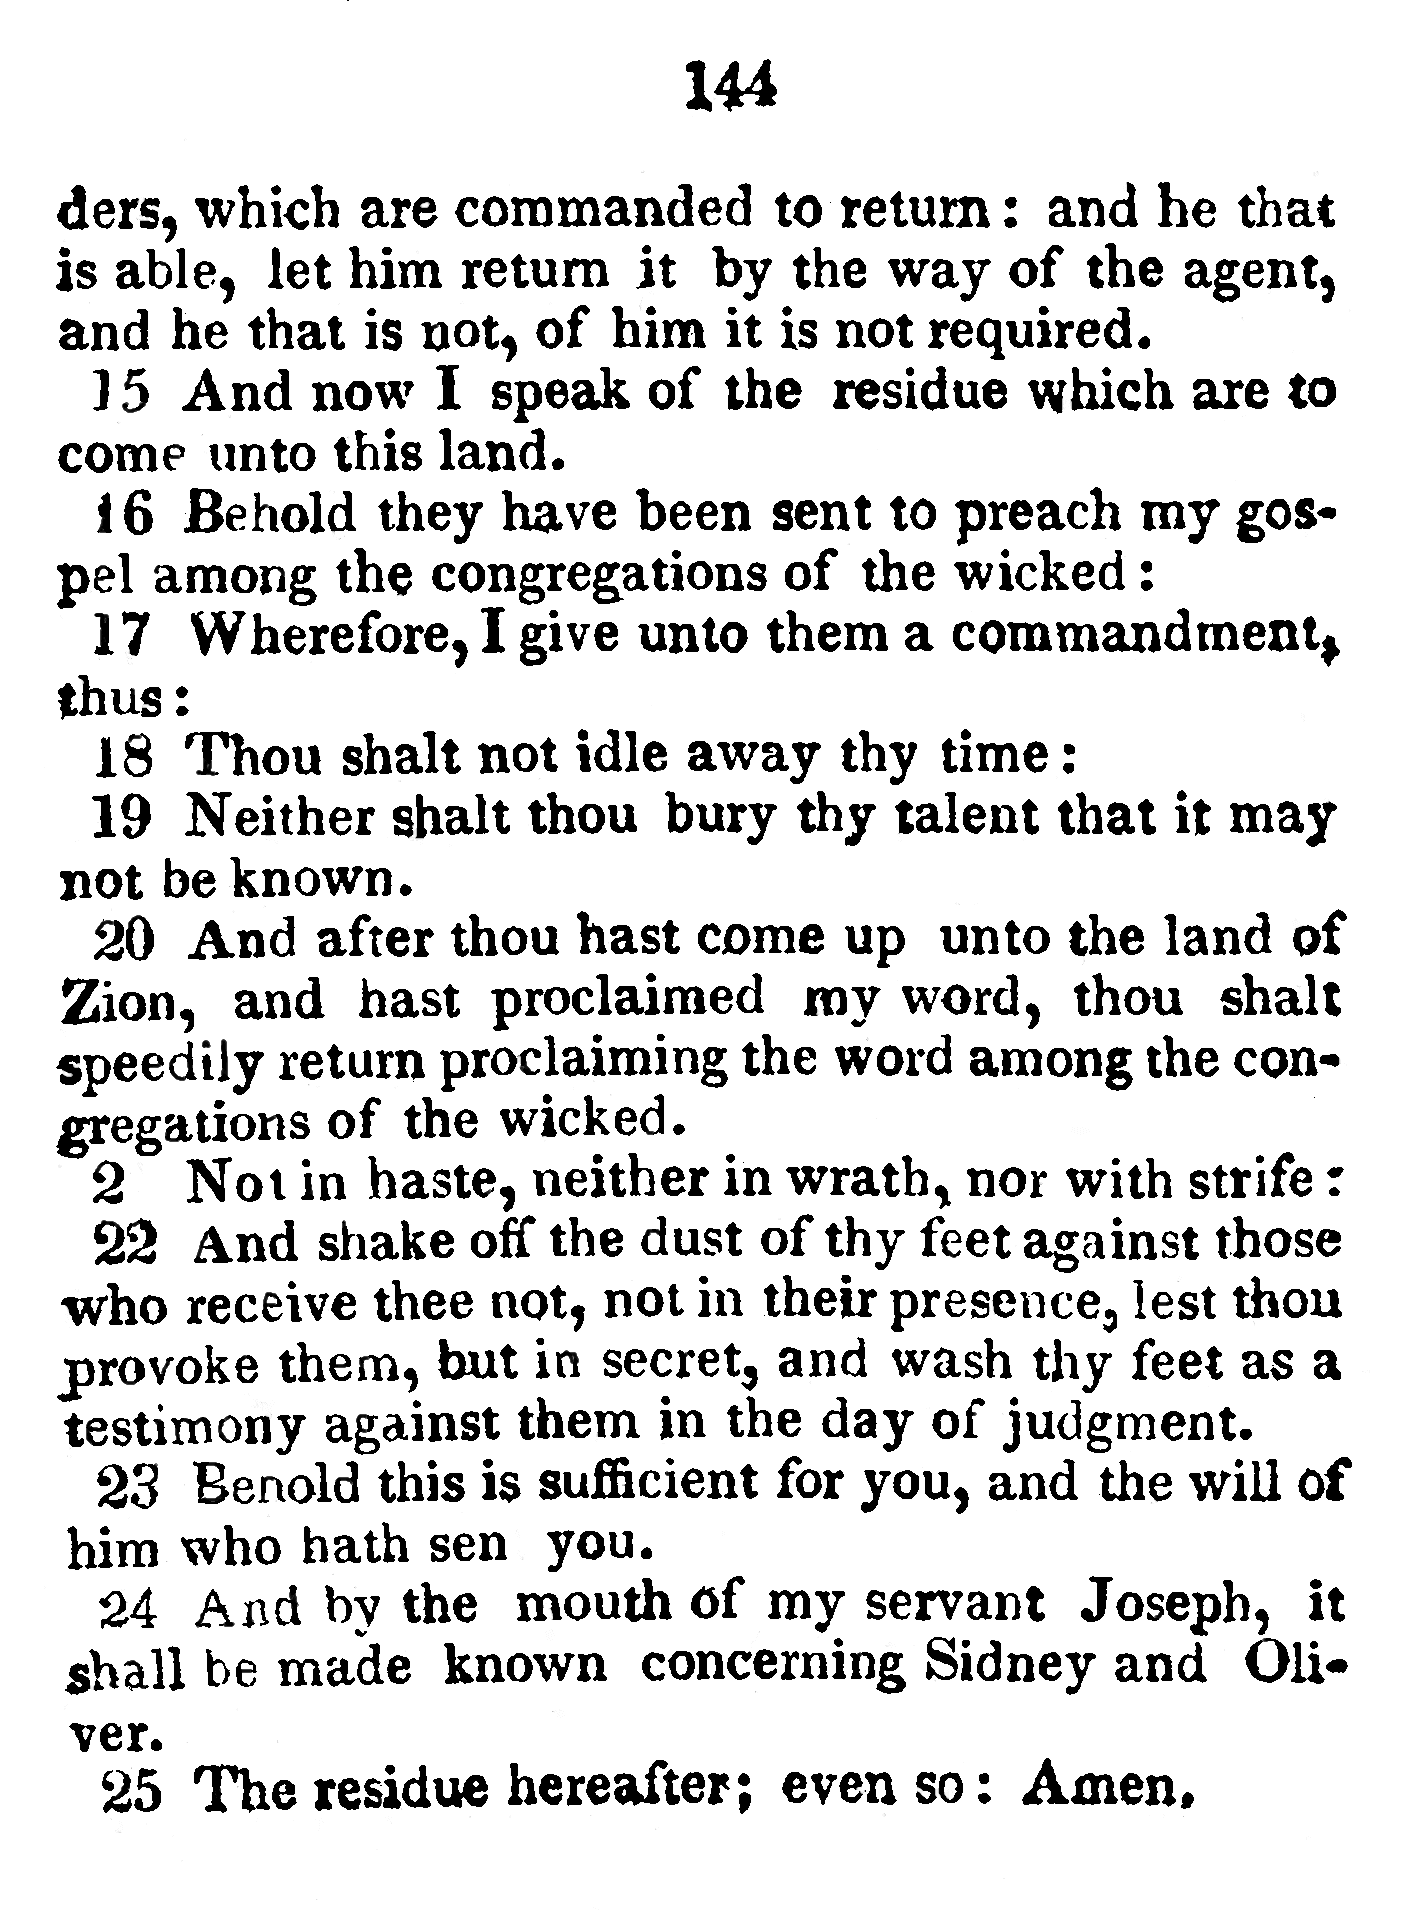 Book Of Commandments 1833 Page 144